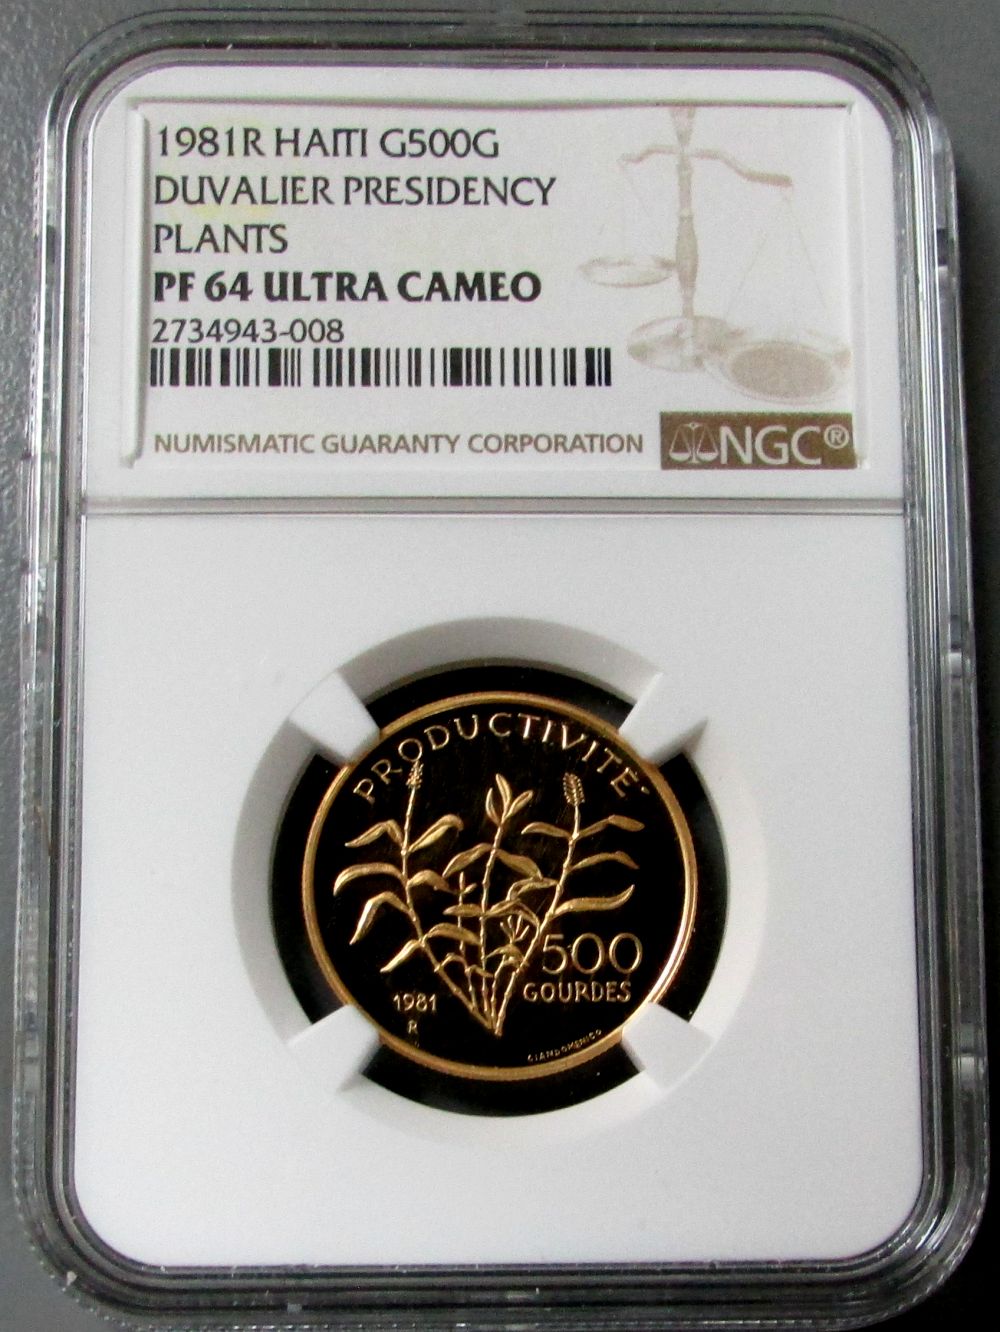 1981 R GOLD HAITI 500 GOURDES DUVALIER PRESIDENCY PLANTS NGC PROOF 64 ULTRA CAMEO ONLY 10 MINTED